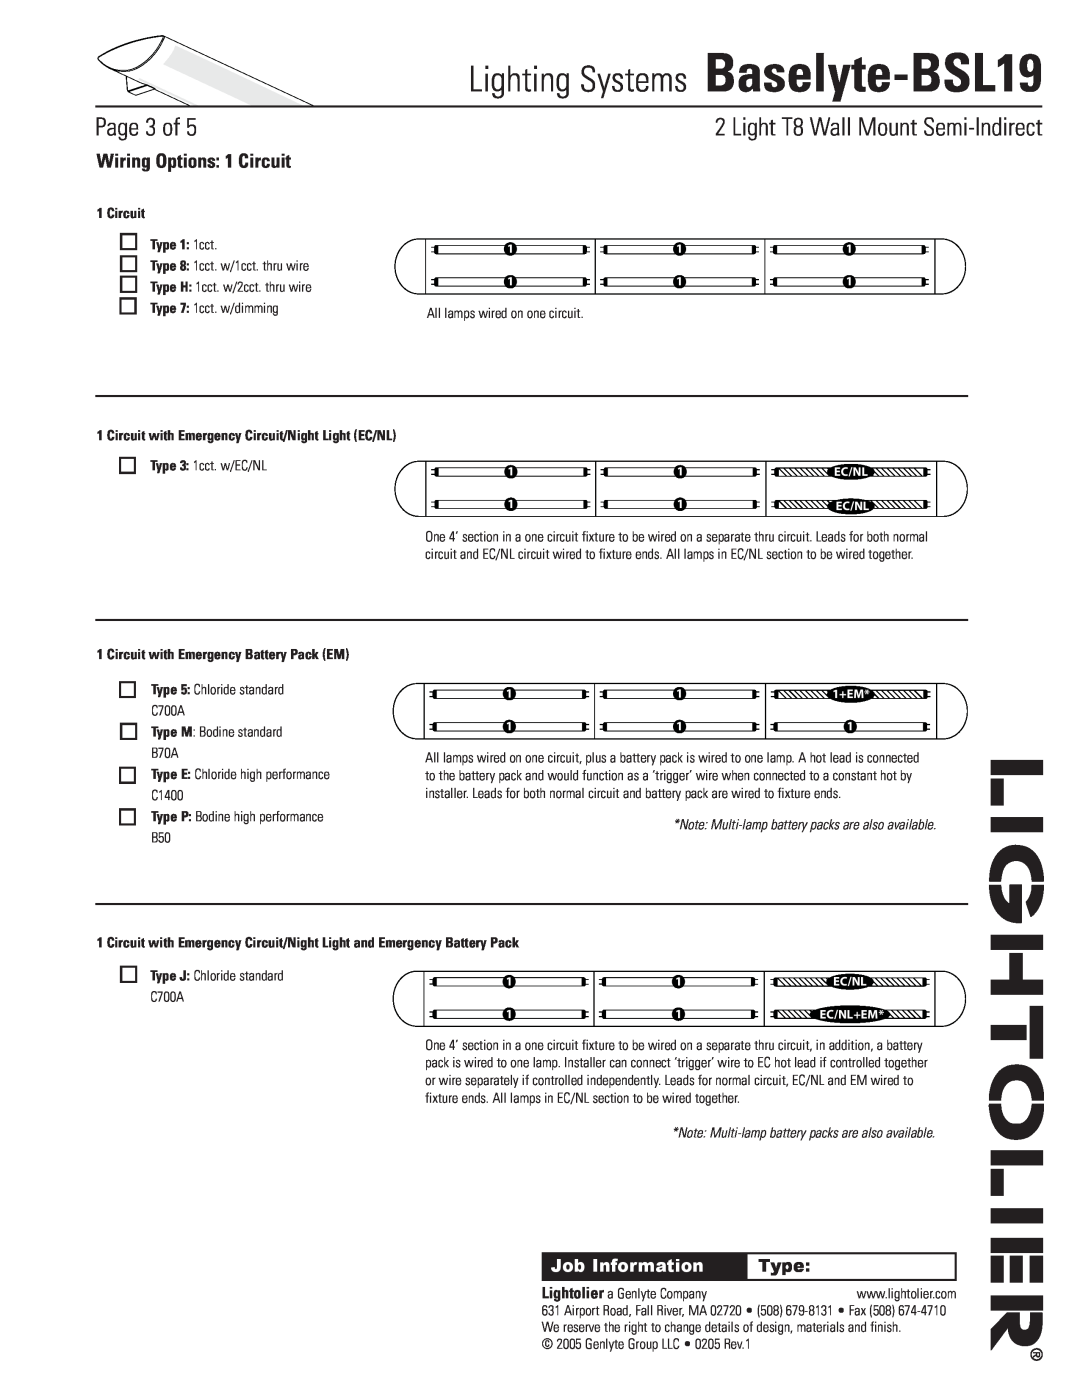 Lightolier Baselyte-BSL19 Wiring Options 1 Circuit, Circuit Type 1 1cct, Circuit with Emergency Battery Pack EM, Page of 